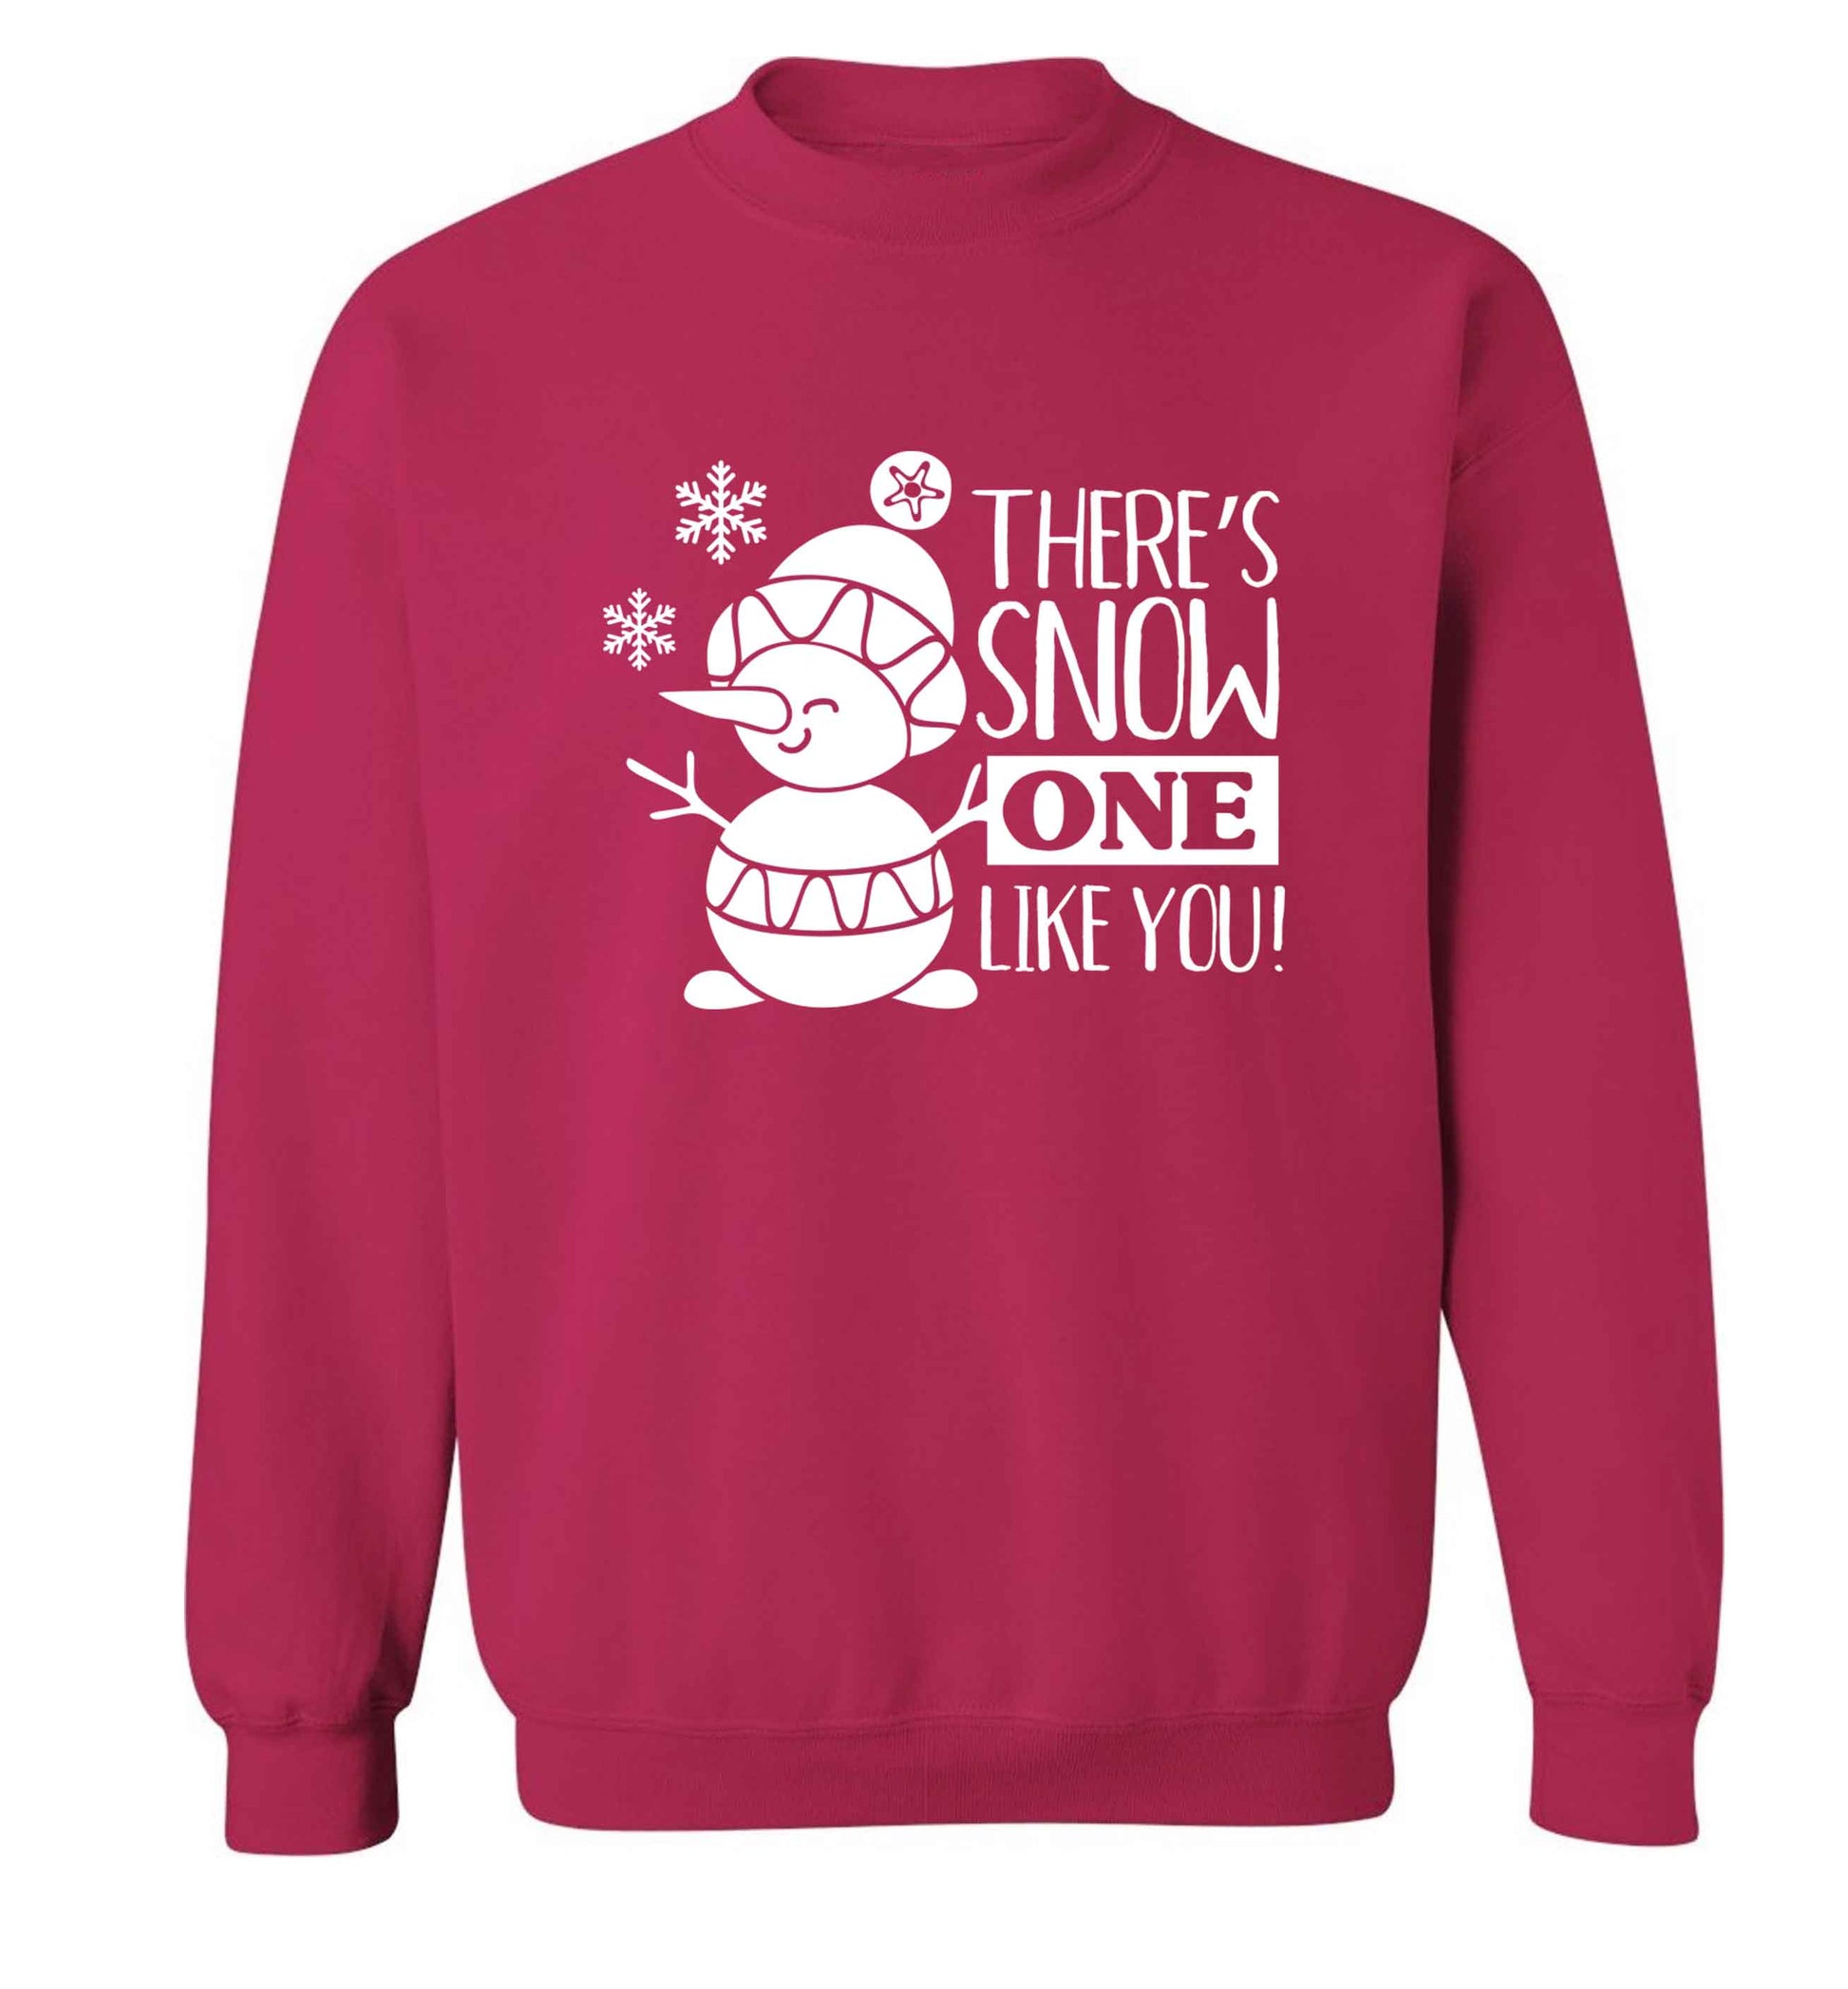 There's snow one like you adult's unisex pink sweater 2XL